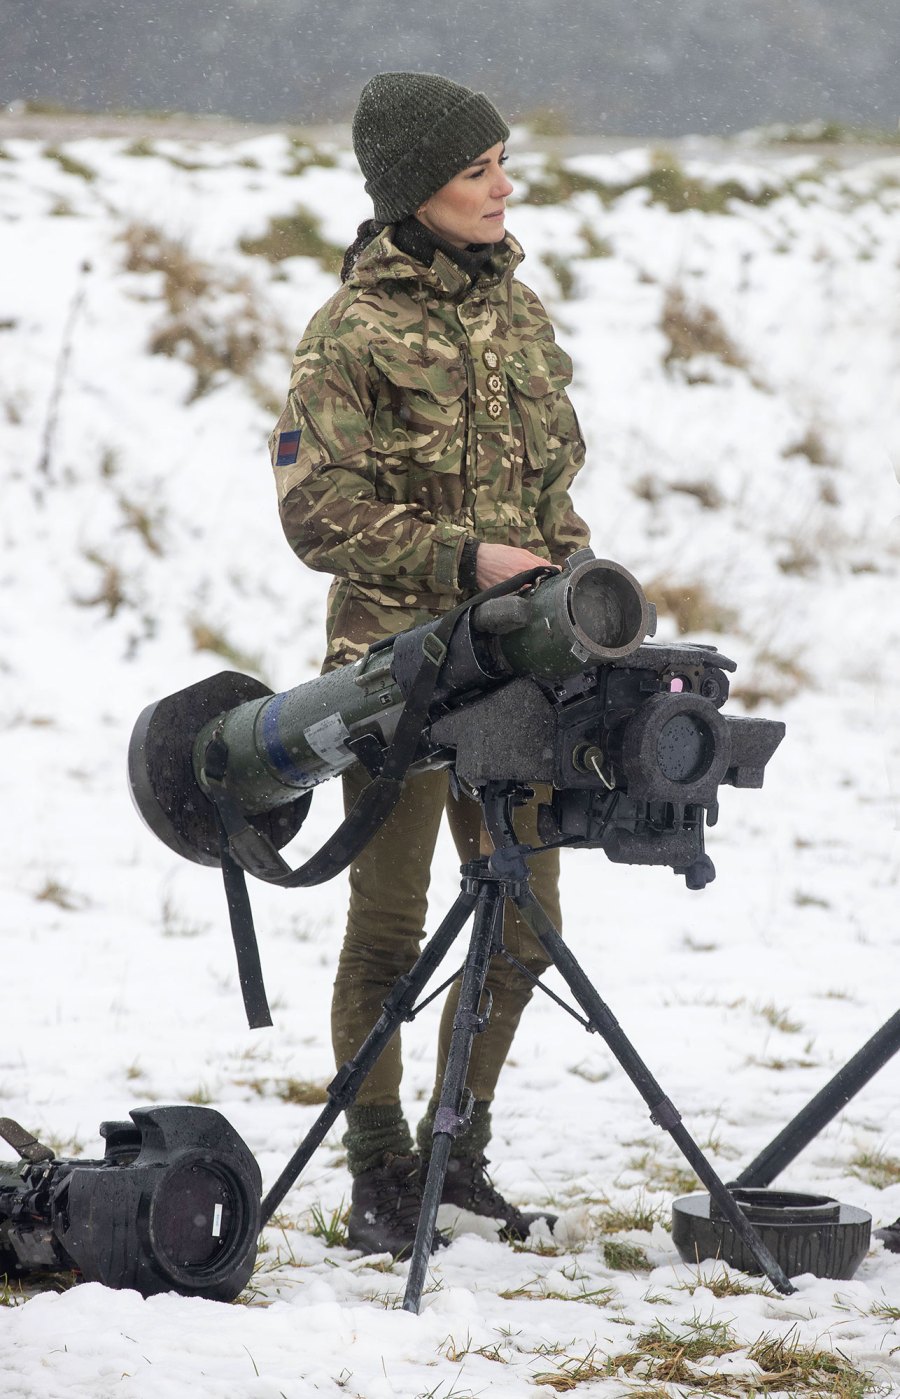 Duchess Kate Middleton Wears Military Camouflage While Participating in Battlefield Training Exercises 5